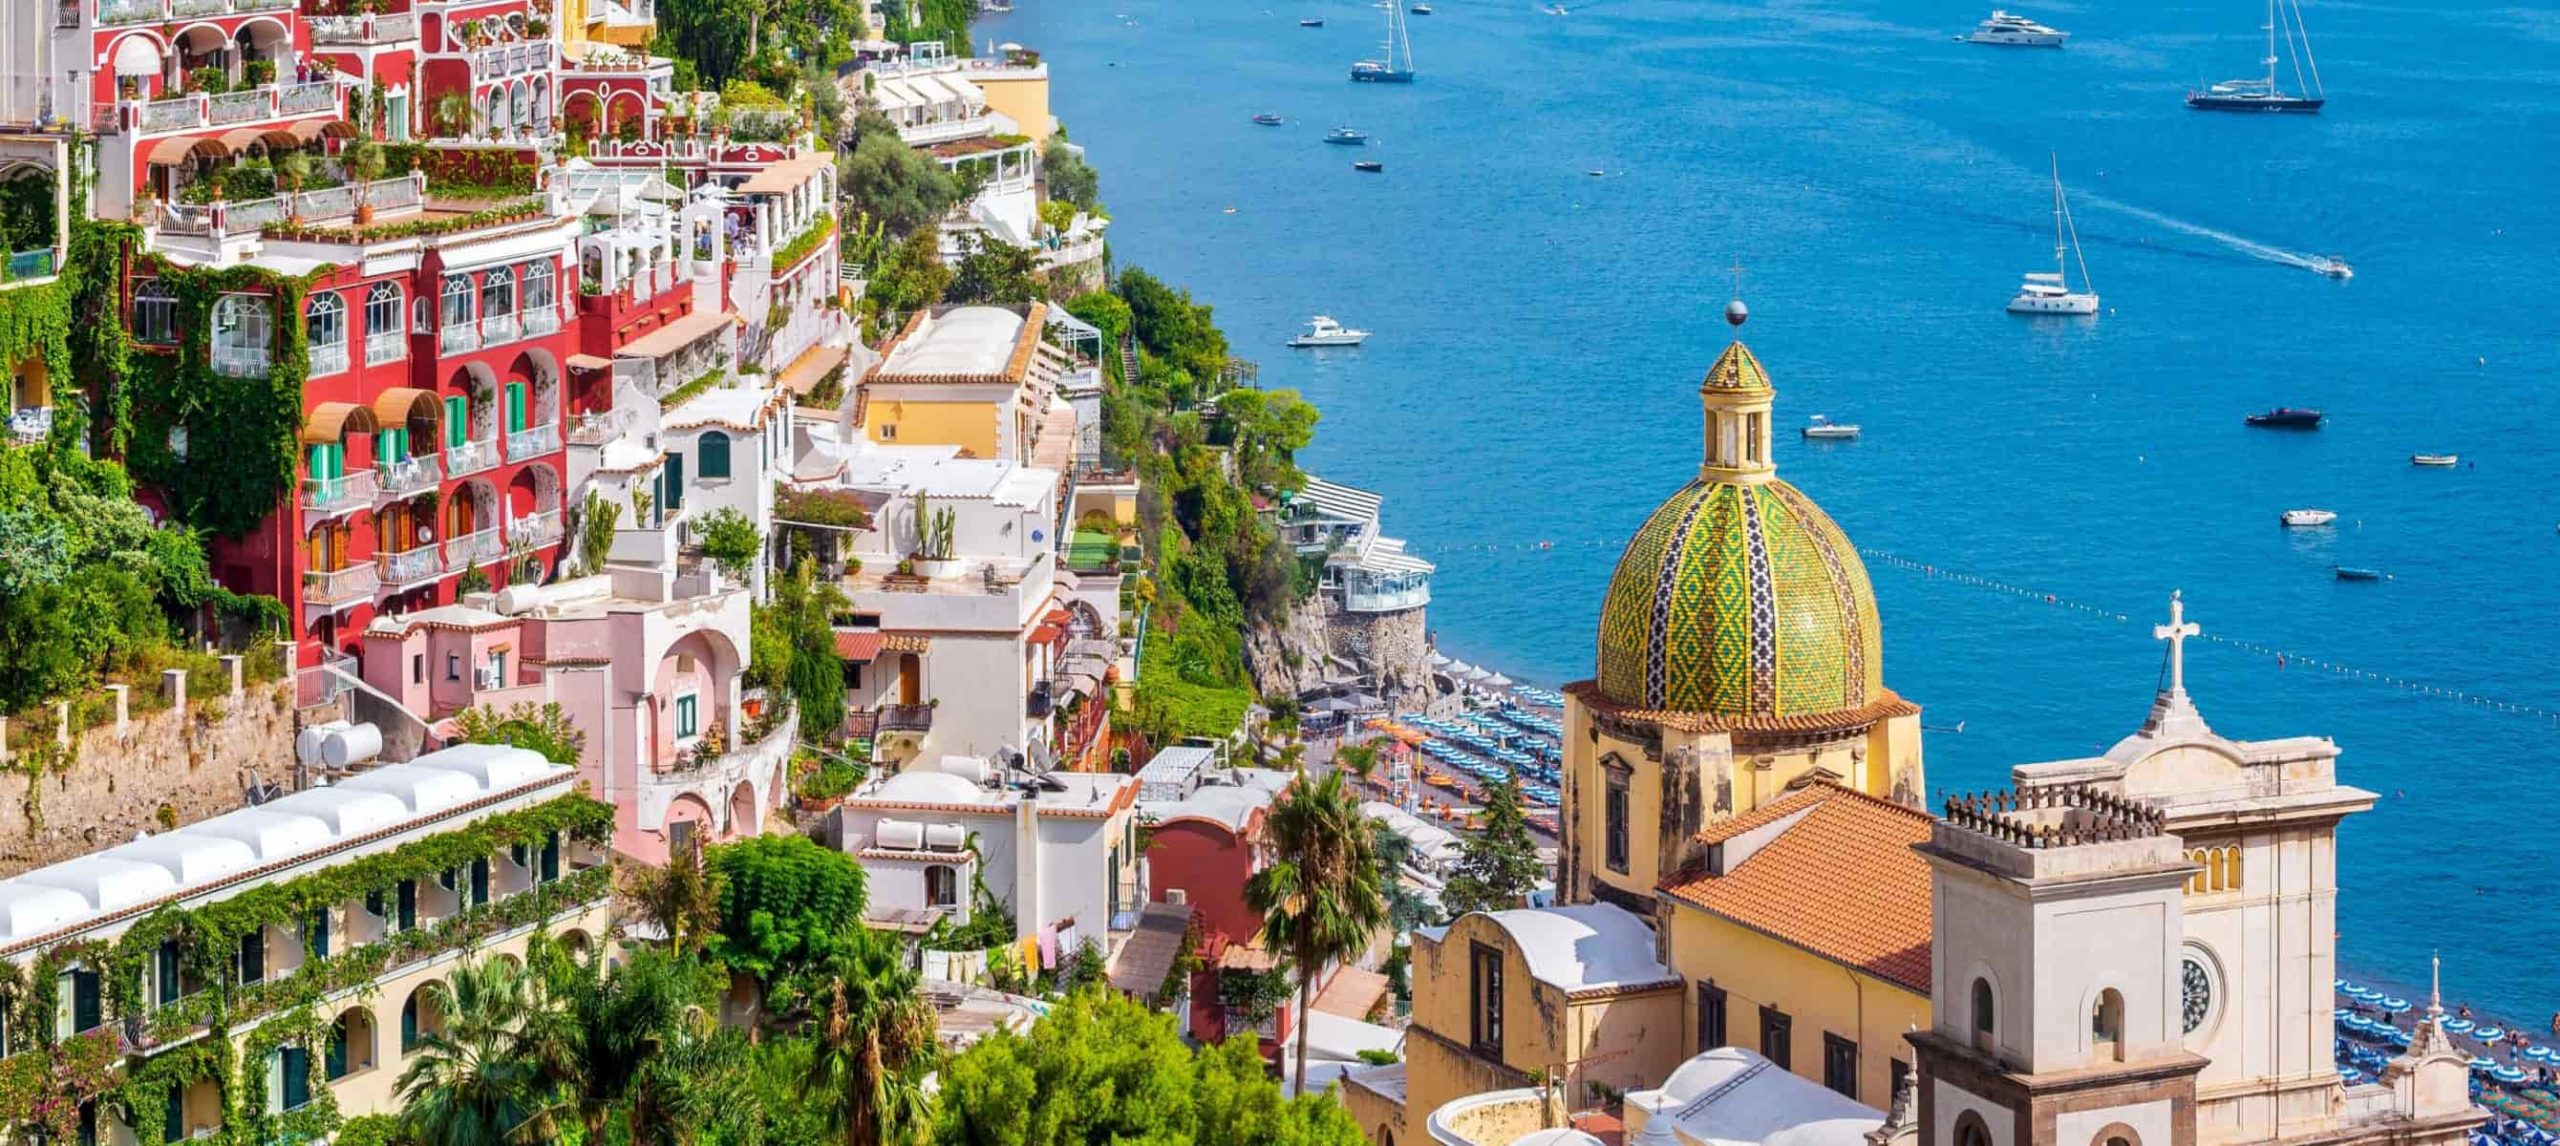 4 Best Ways To Get From Naples to Positano